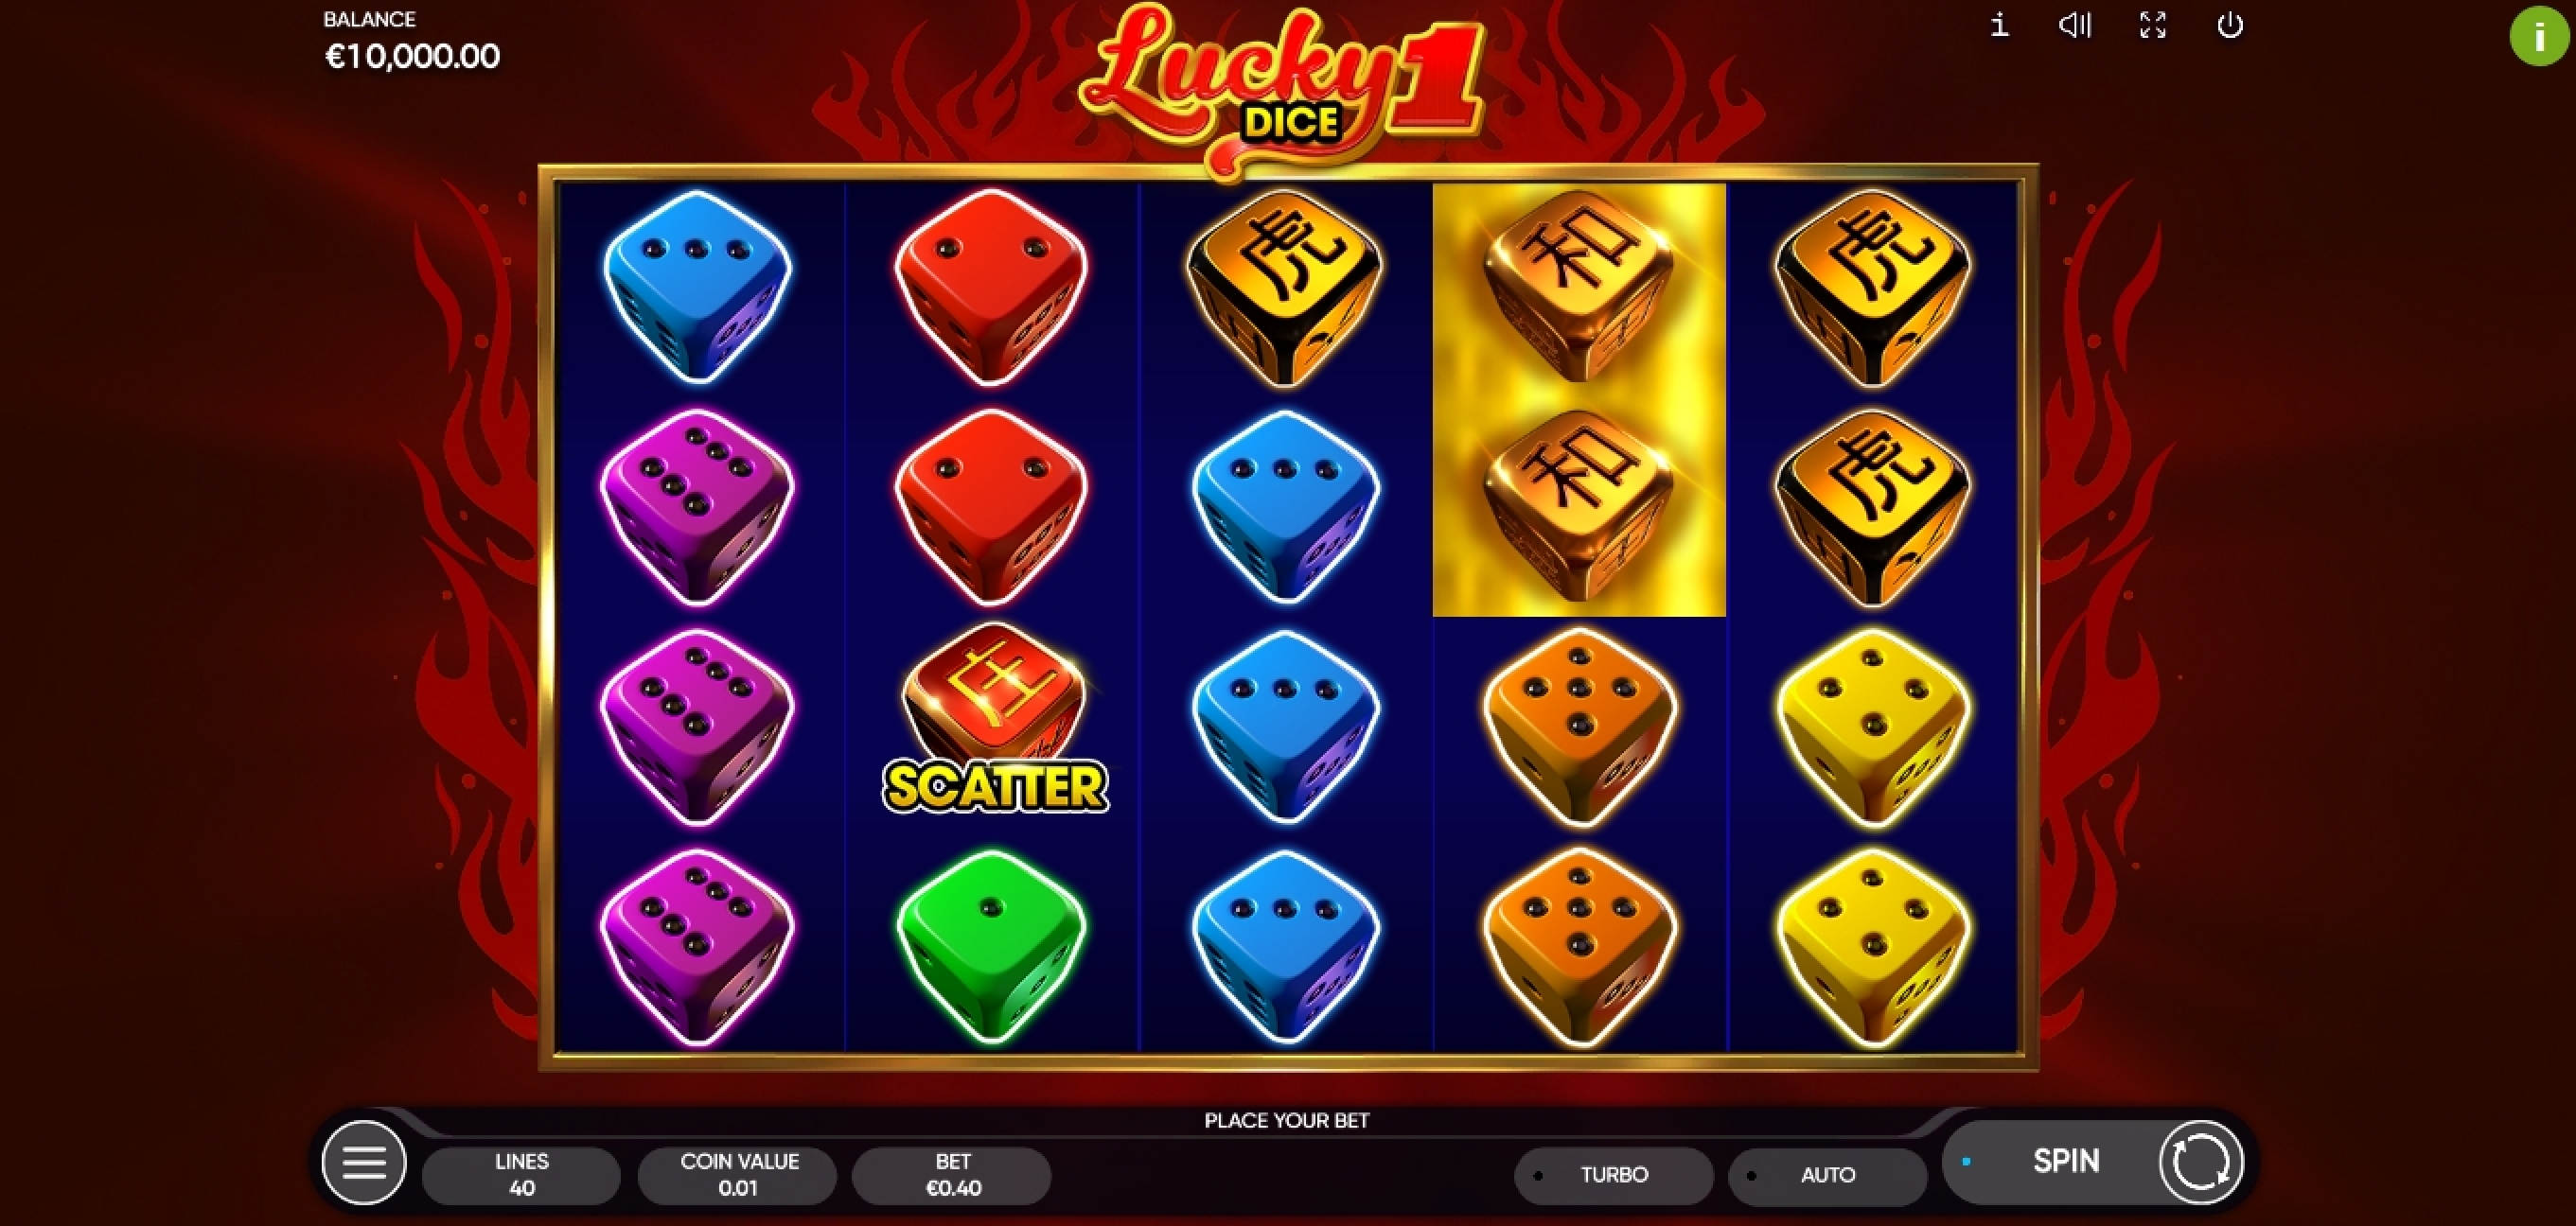 Reels in Lucky Dice 1 Slot Game by Endorphina